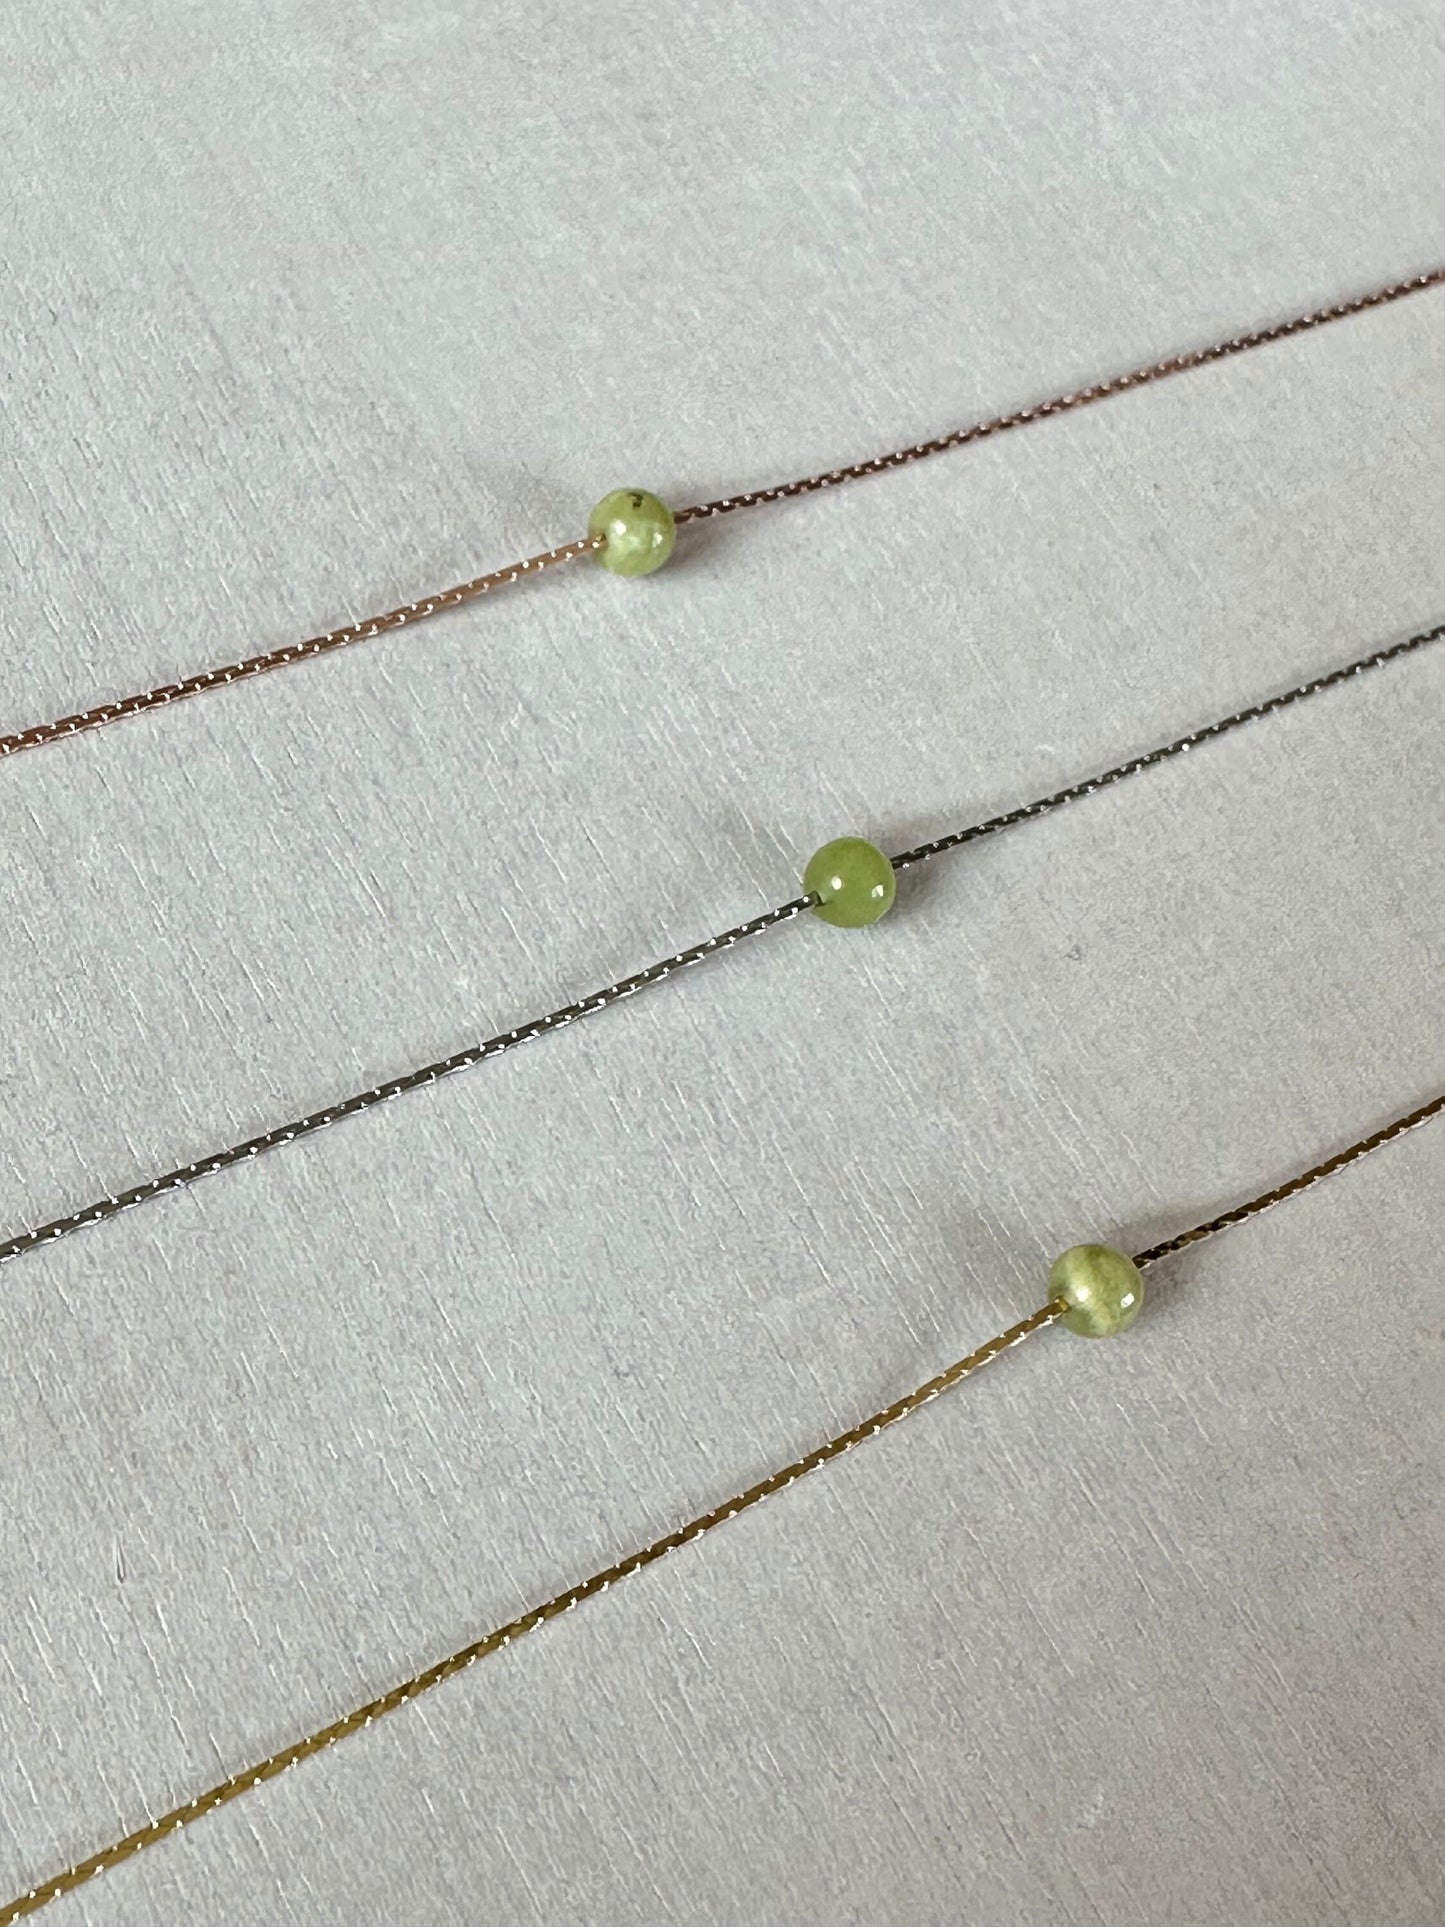 Peridot Opal Necklace | Rose Gold | Gold | Silver | Dainty Necklace | Layering Necklace | Gemstone Necklace | Bead Necklace